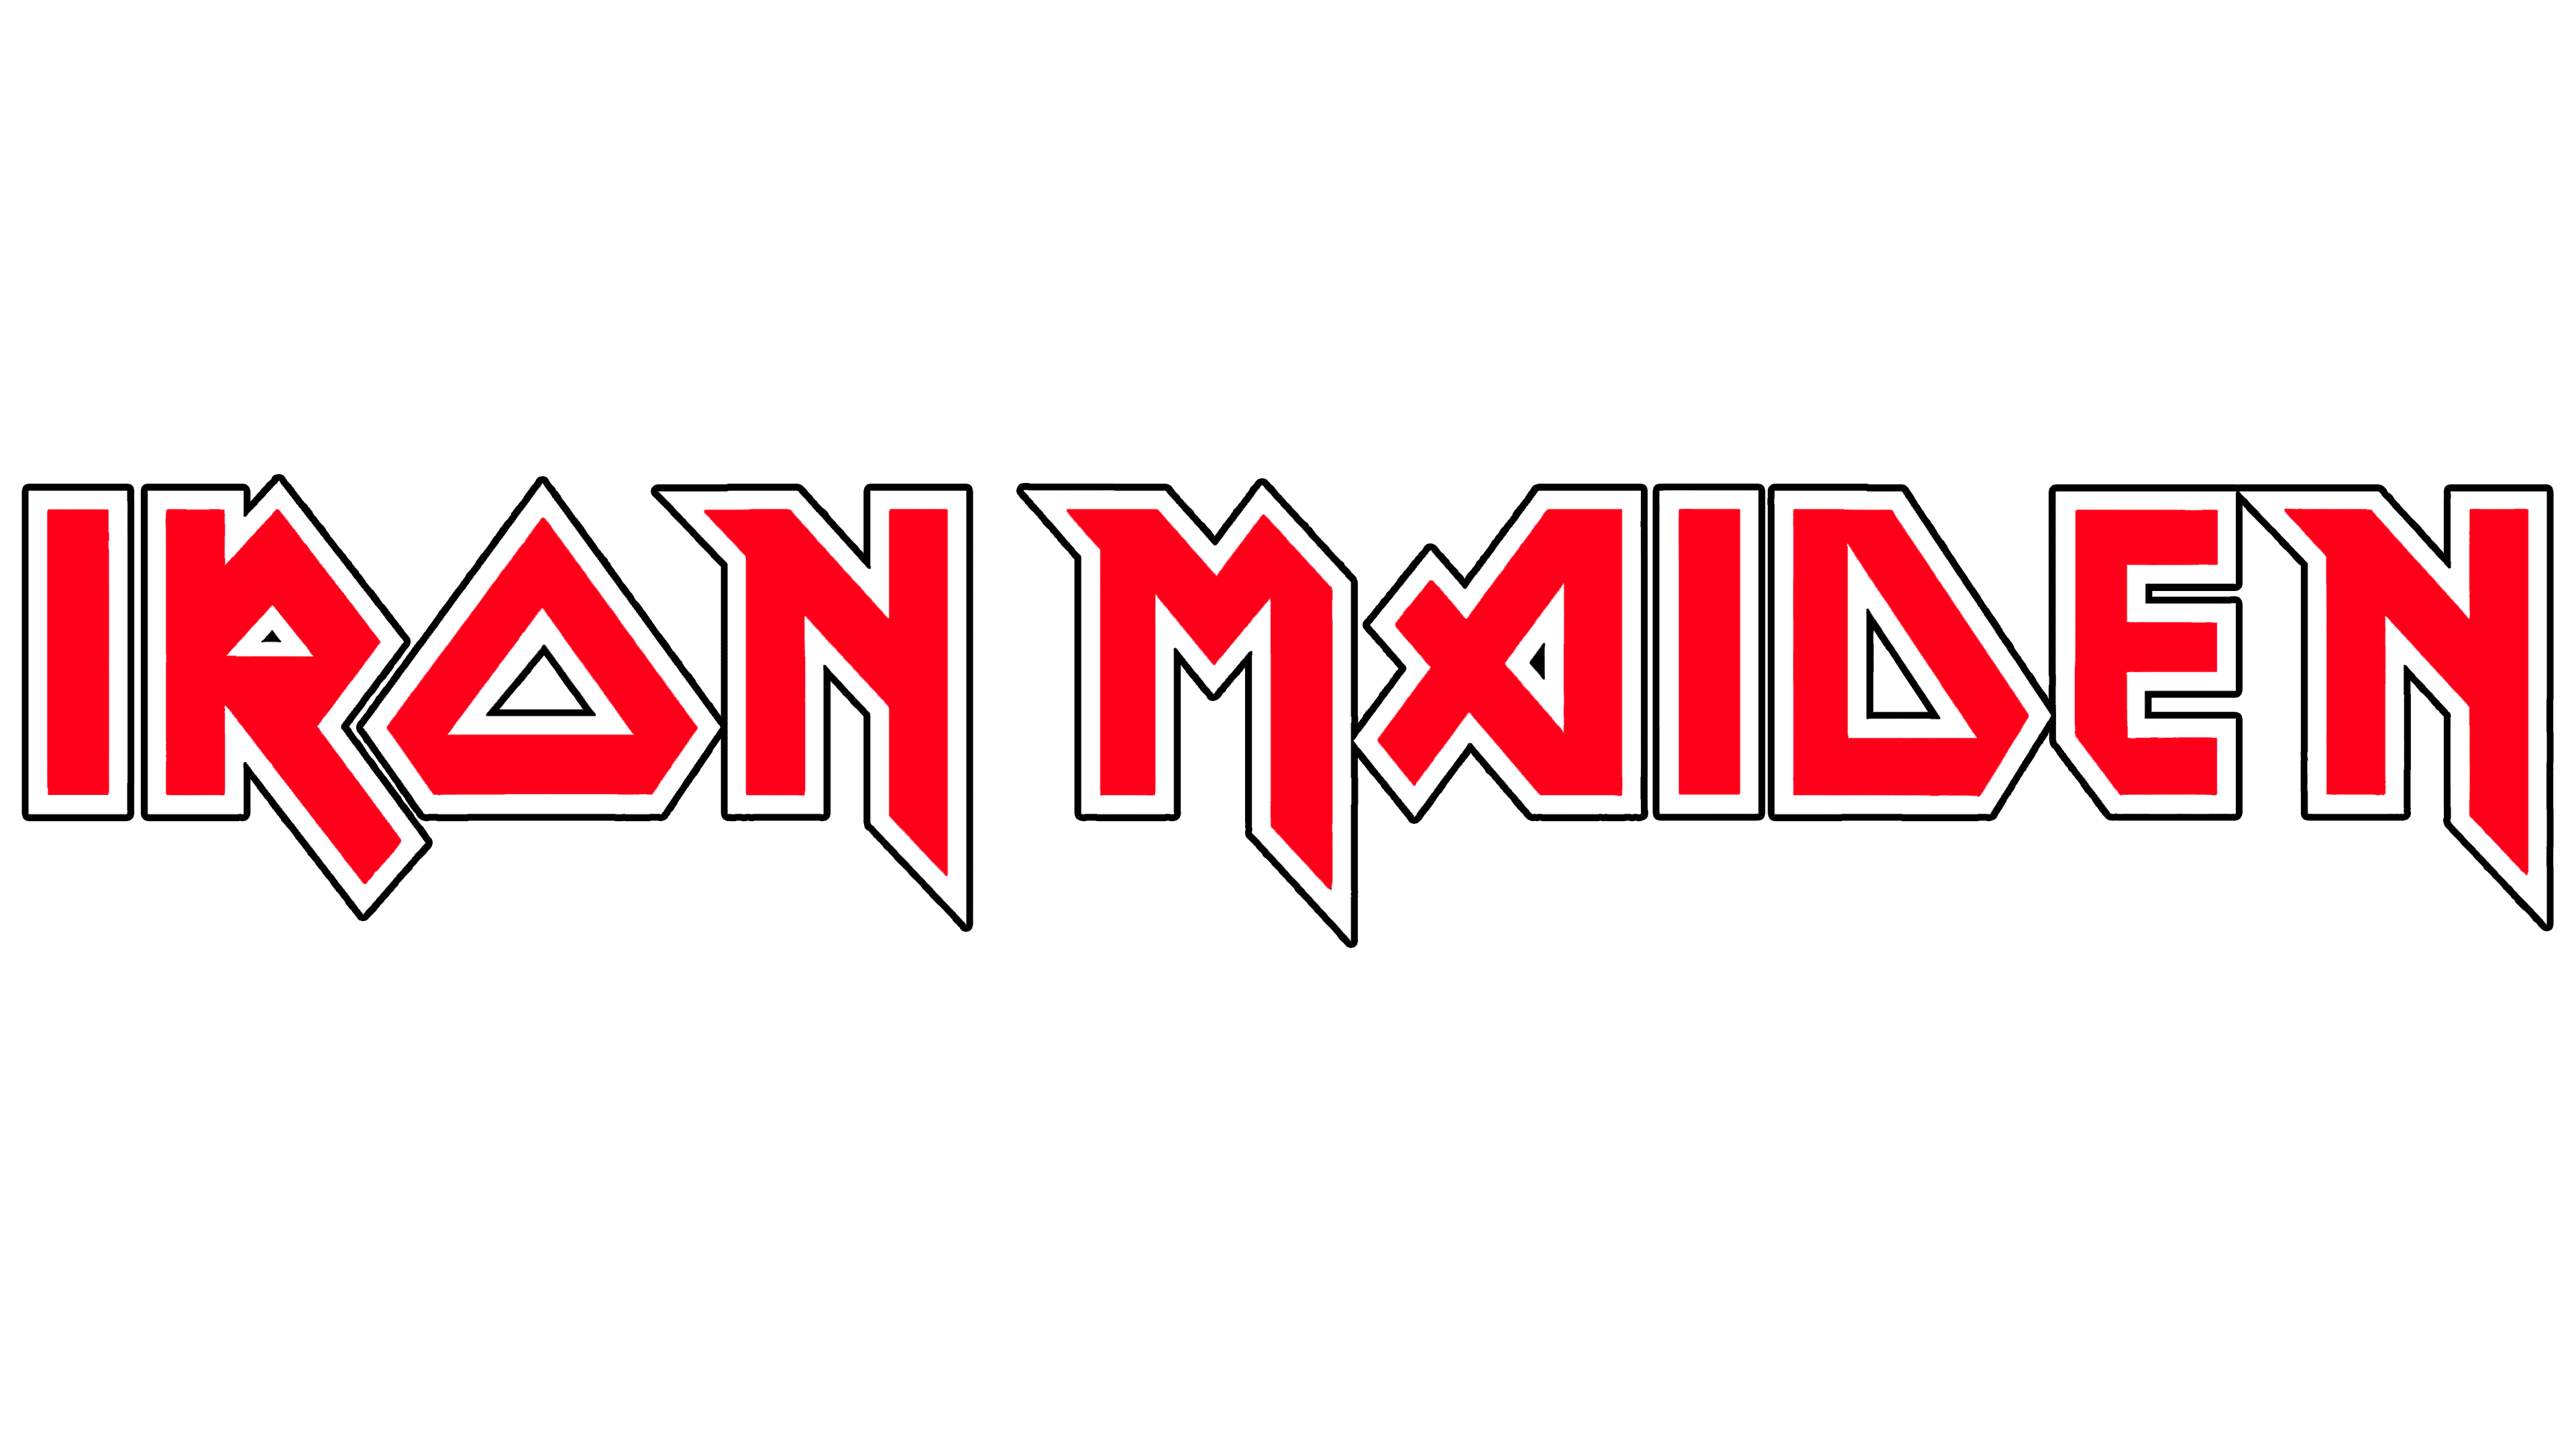 Iron Maiden Logo, symbol, meaning, history, PNG, brand